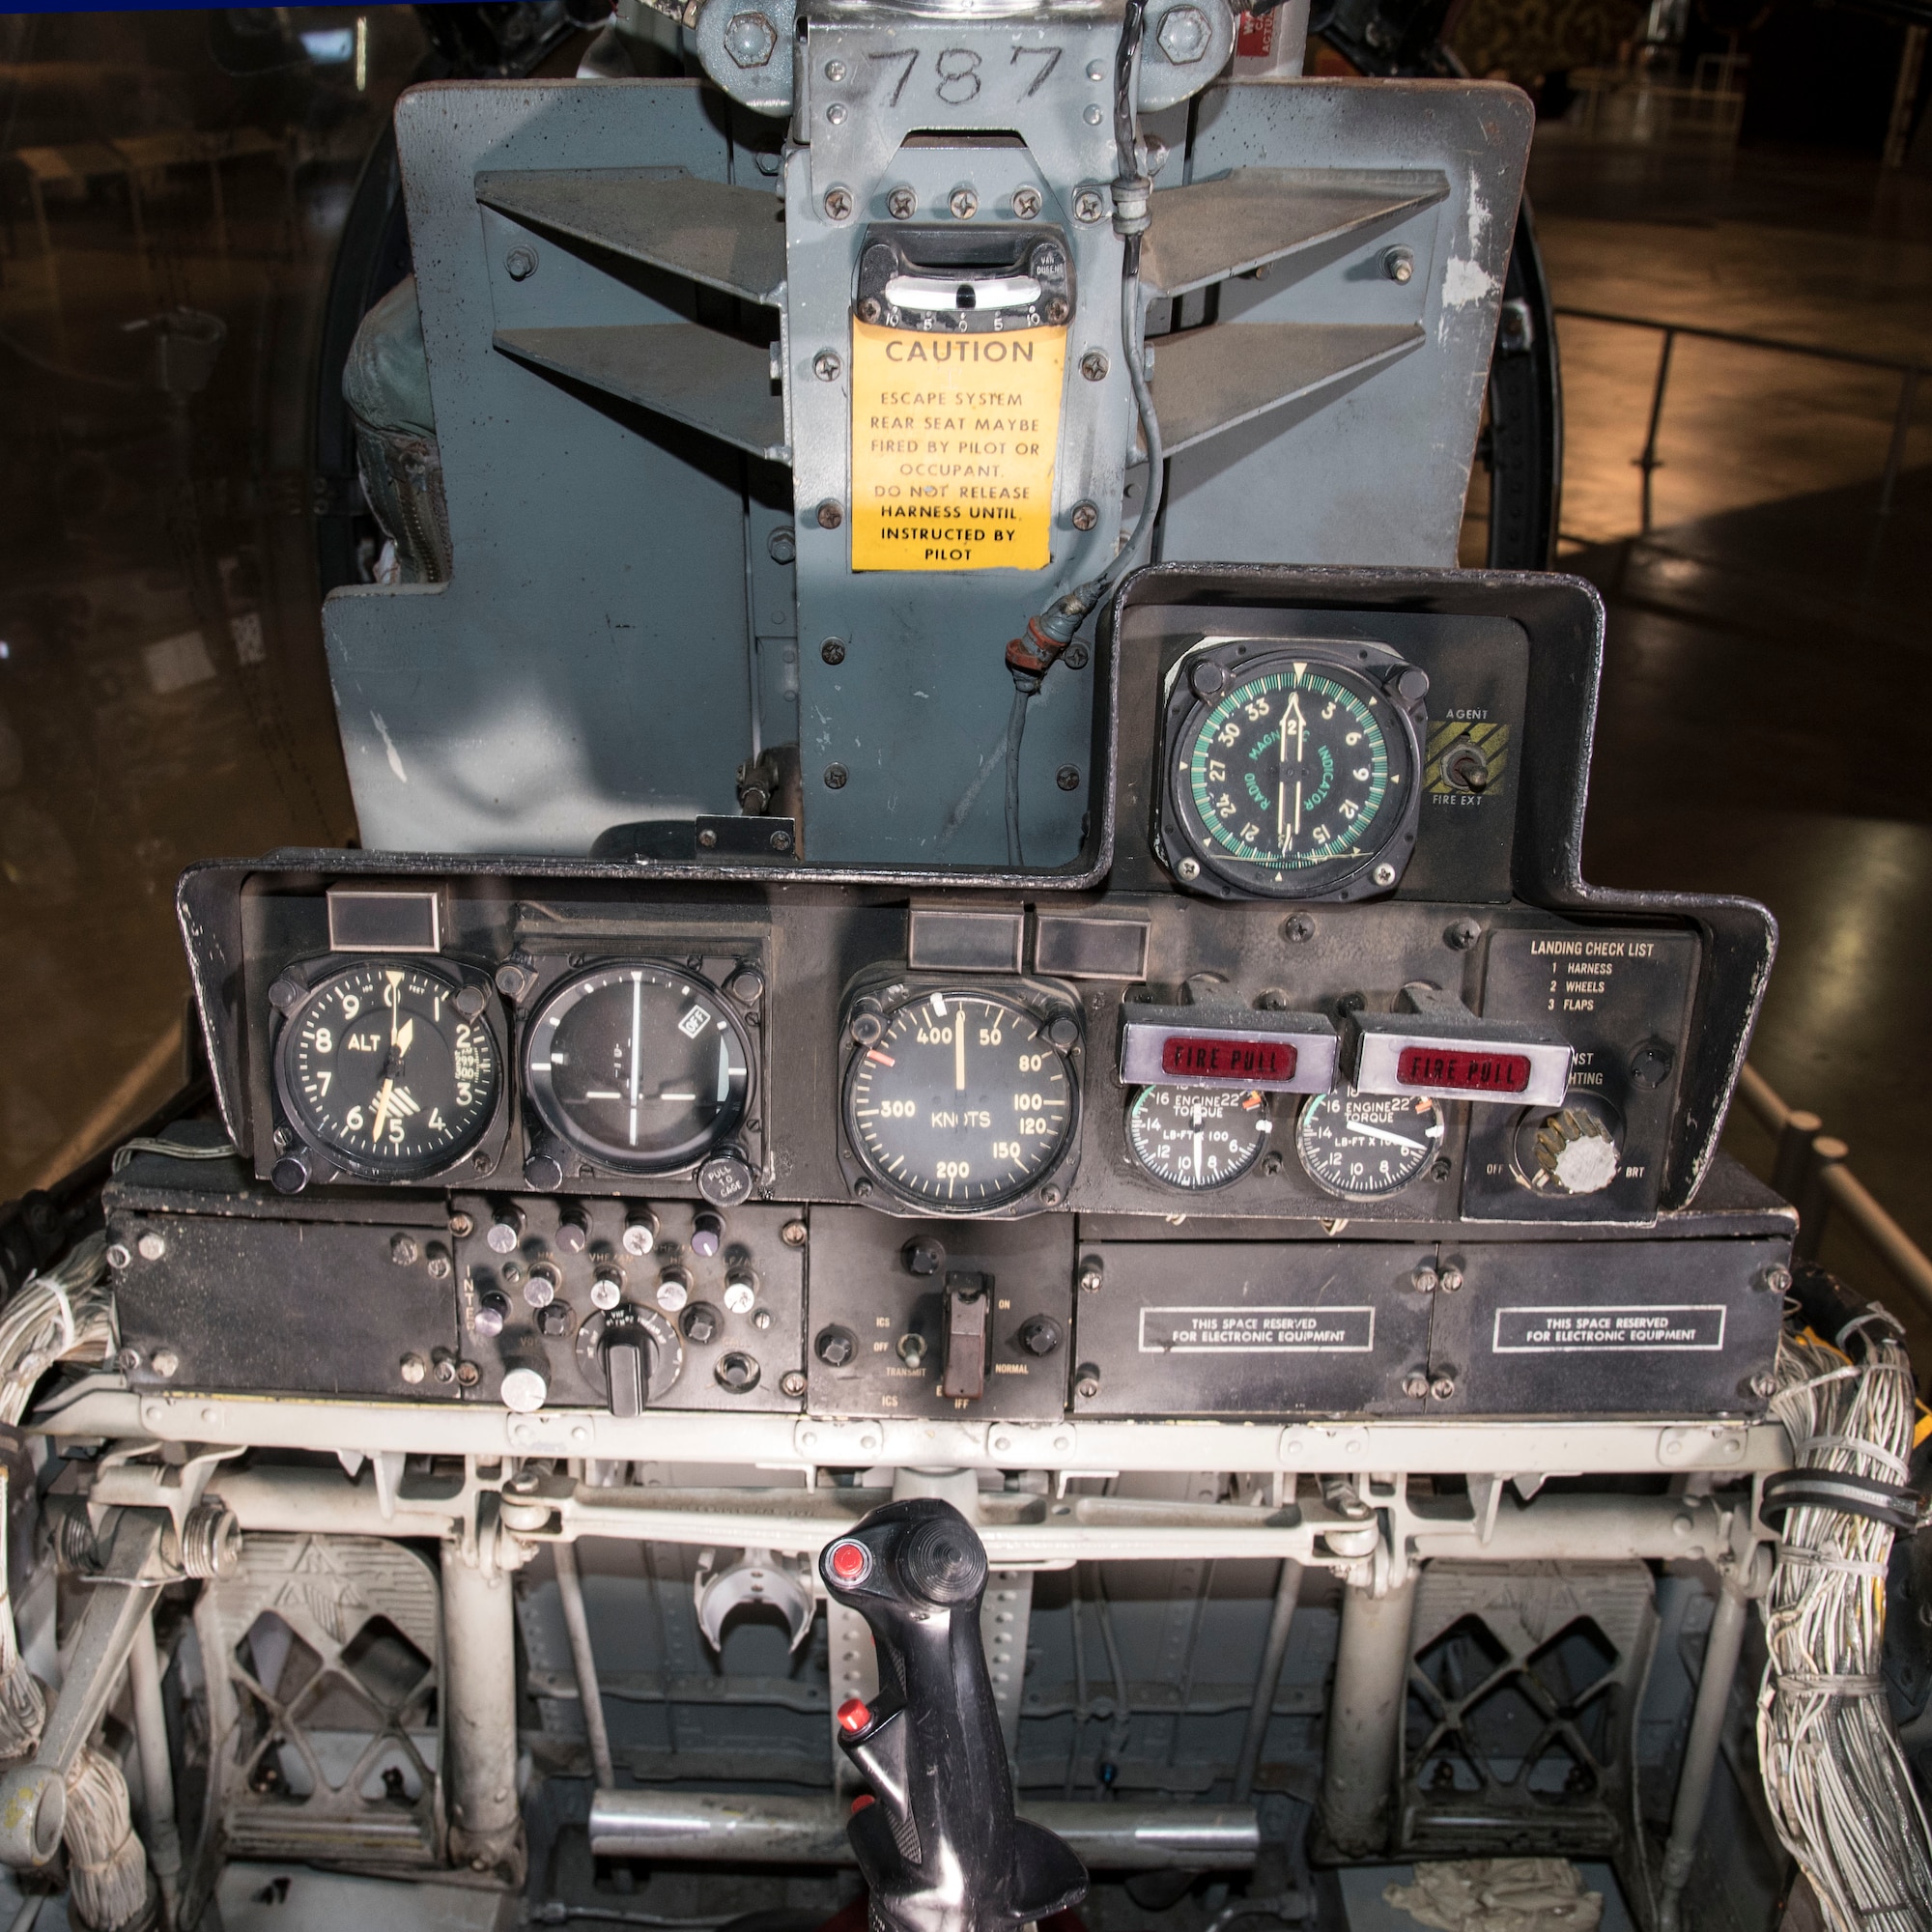 DAYTON, Ohio -- North American Rockwell OV-10A rear cockpit in the Southeast Asia War Gallery at the National Museum of the United States Air Force. (U.S. Air Force photo by Ken LaRock)